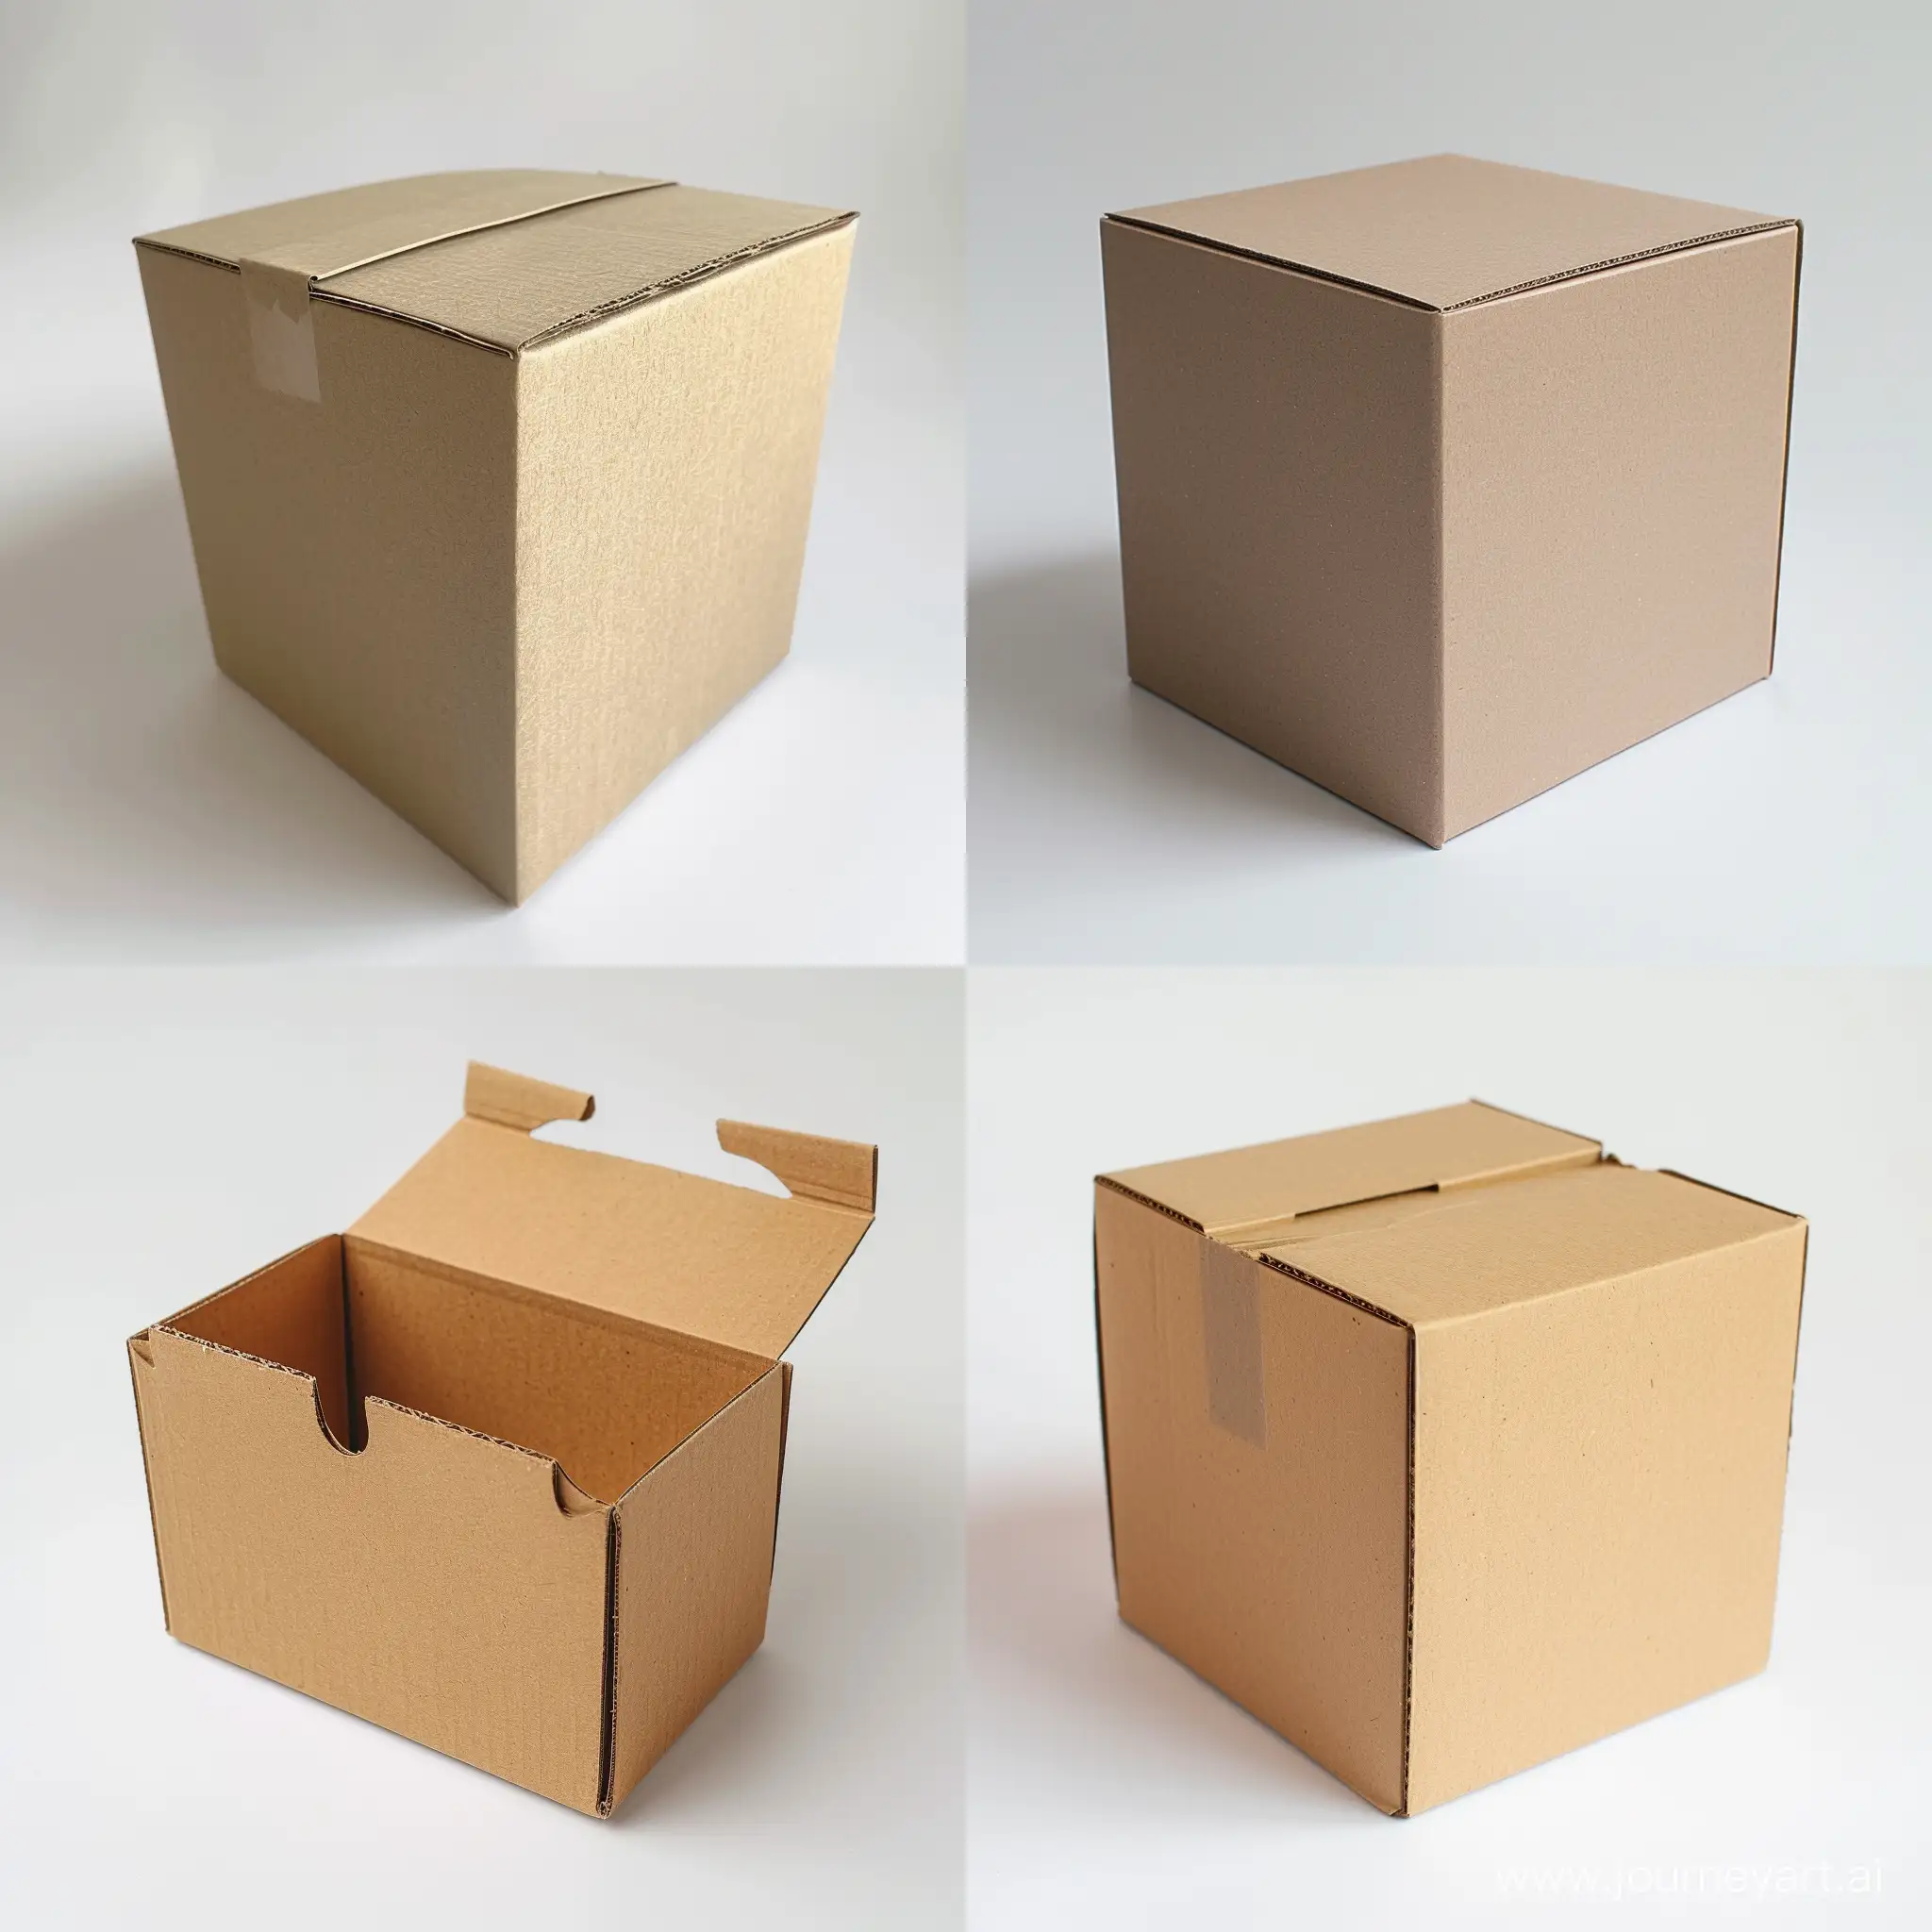 Cozy-LightBrown-Box-with-Small-Walls-Minimalistic-3D-Rendering